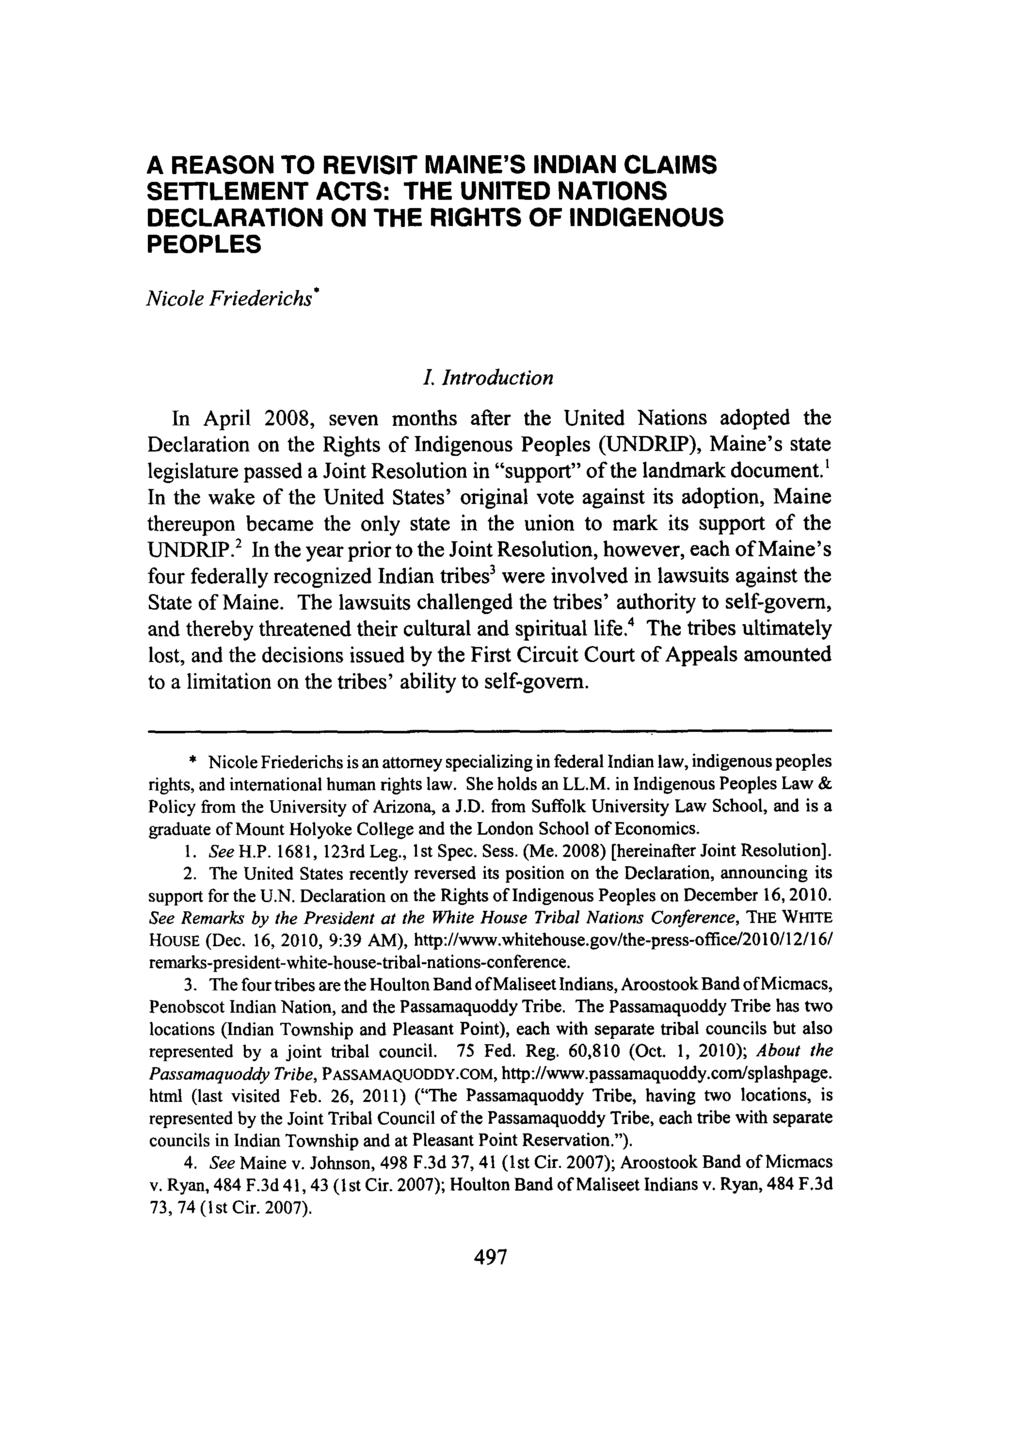 A REASON TO REVISIT MAINE'S INDIAN CLAIMS SETTLEMENT ACTS: THE UNITED NATIONS DECLARATION ON THE RIGHTS OF INDIGENOUS PEOPLES Nicole Friederichs* I.